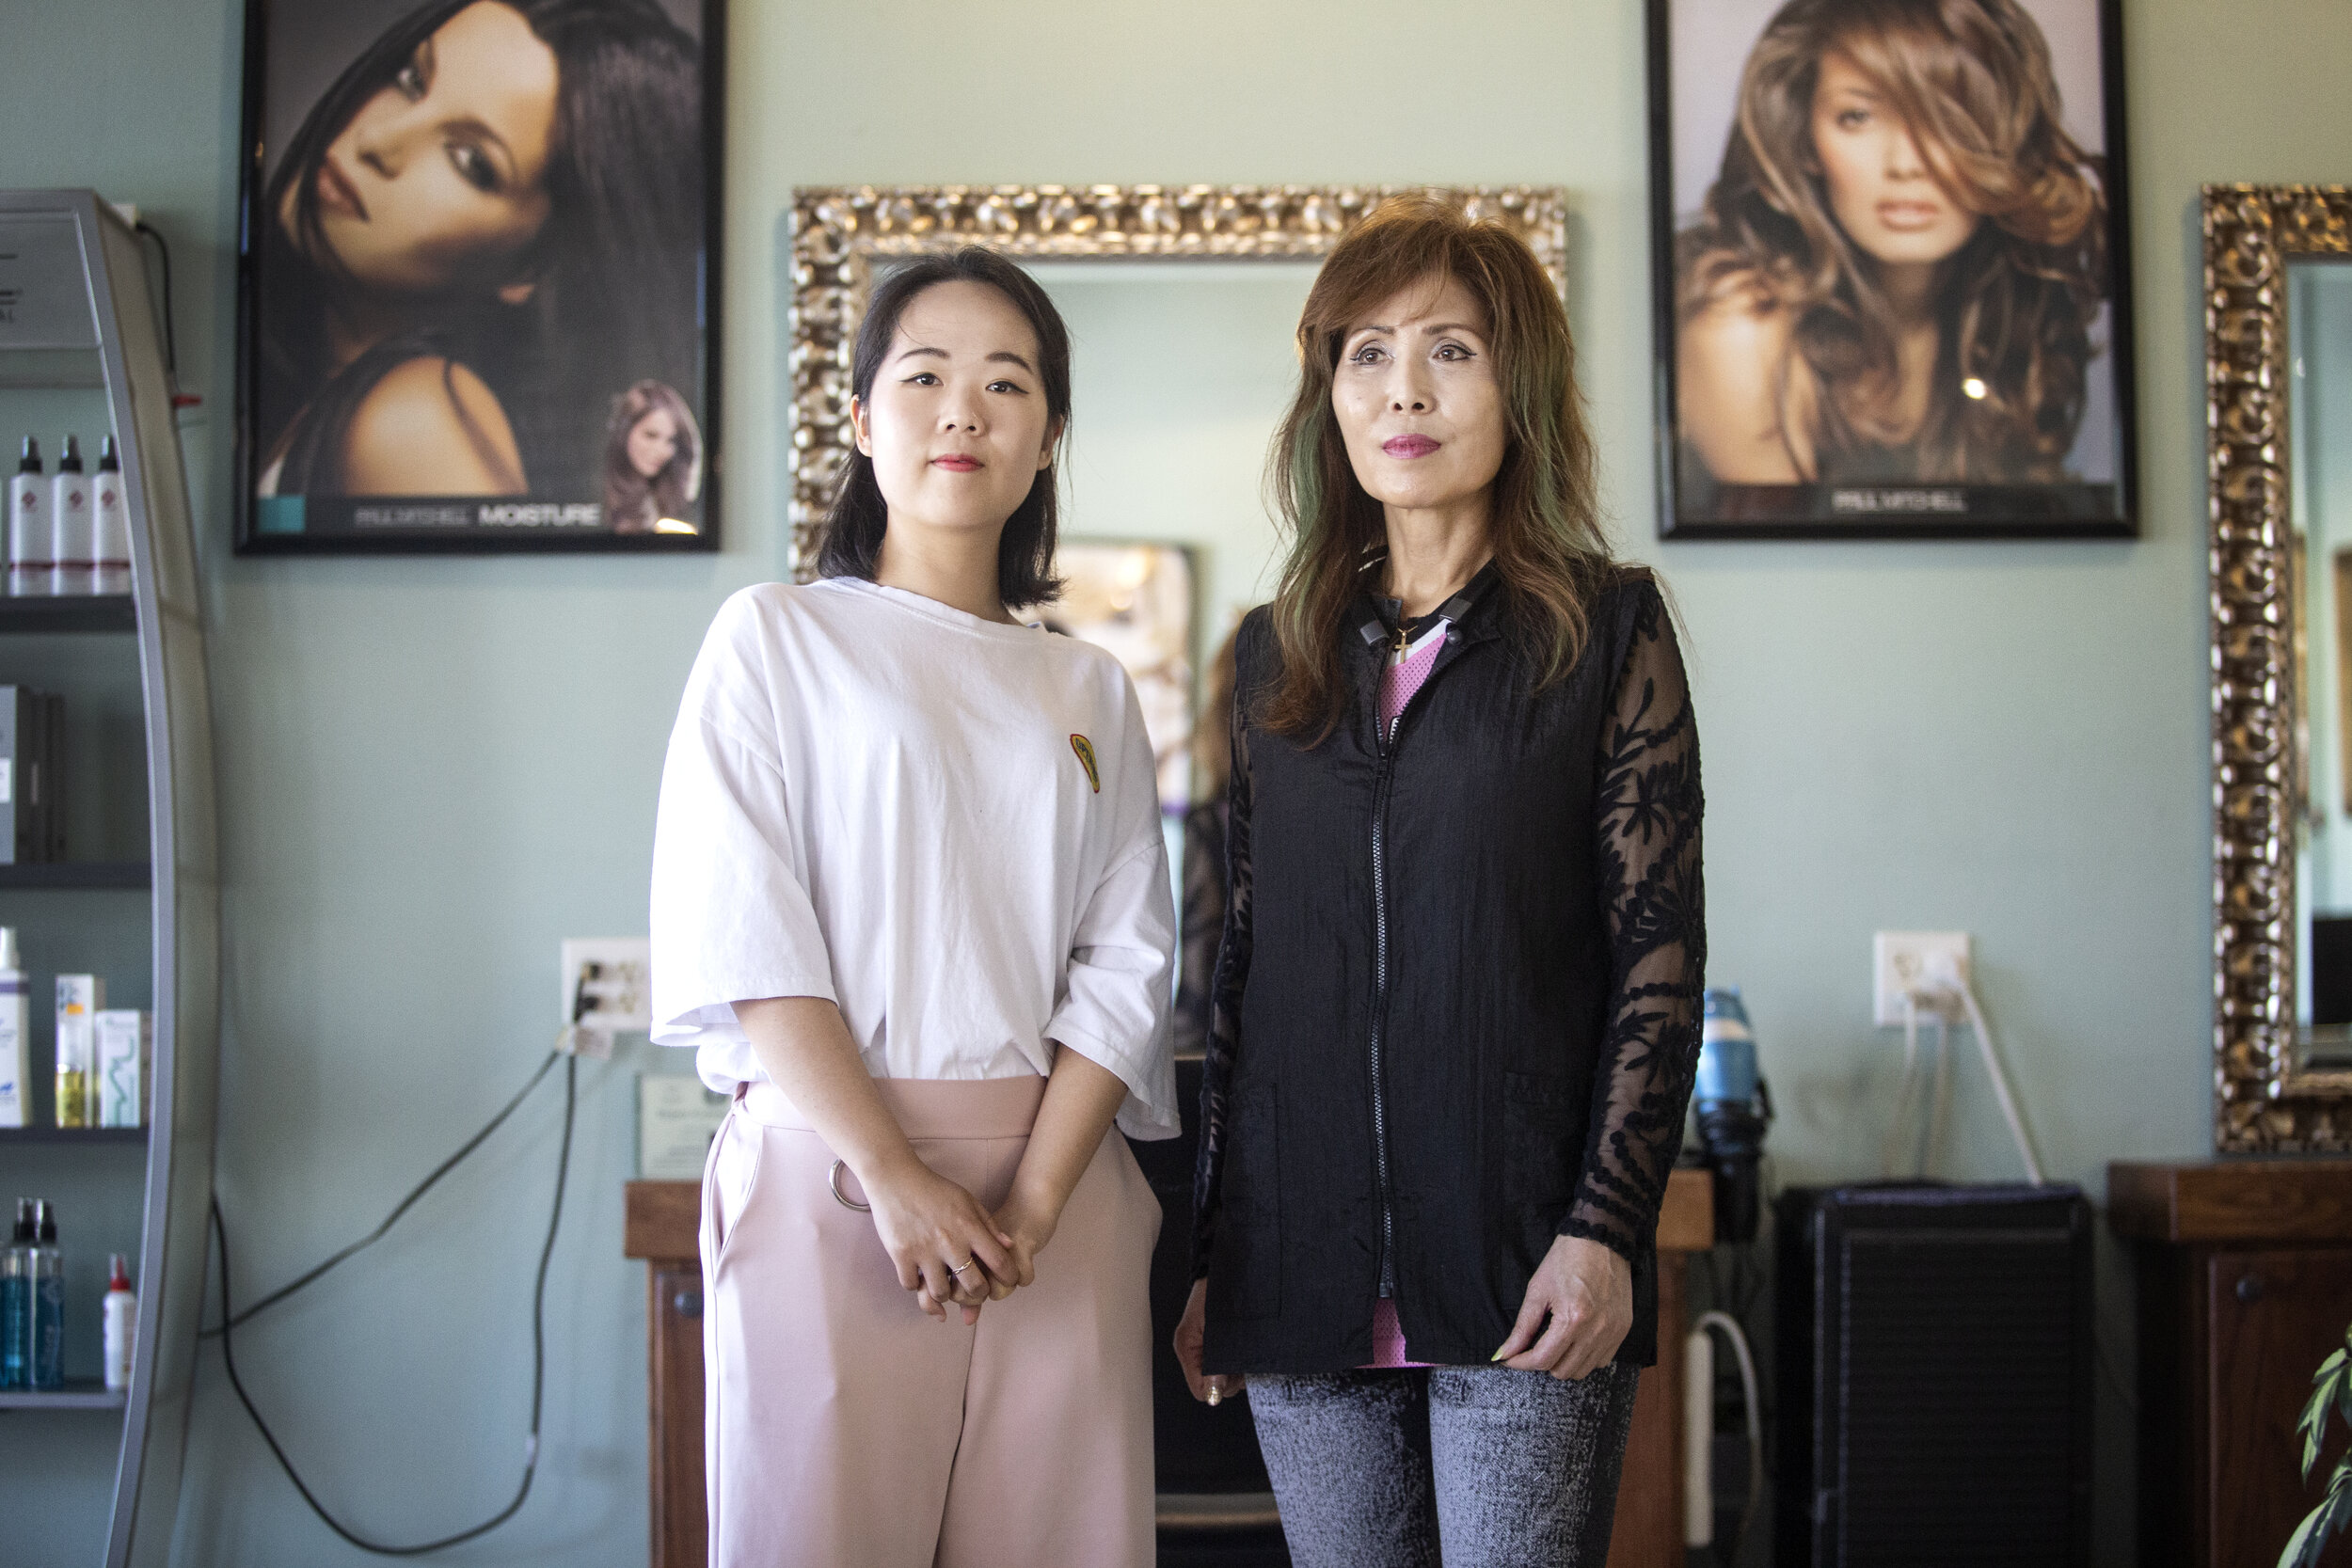  AUSTIN, TX. Sarah Kim (right), owner of Scissors Sound Hair Salon, keeps her business open for now, but is uncertain about the future as the coronavirus pandemic continues to worsen. Hair appointments have tapered off since January and have now almo